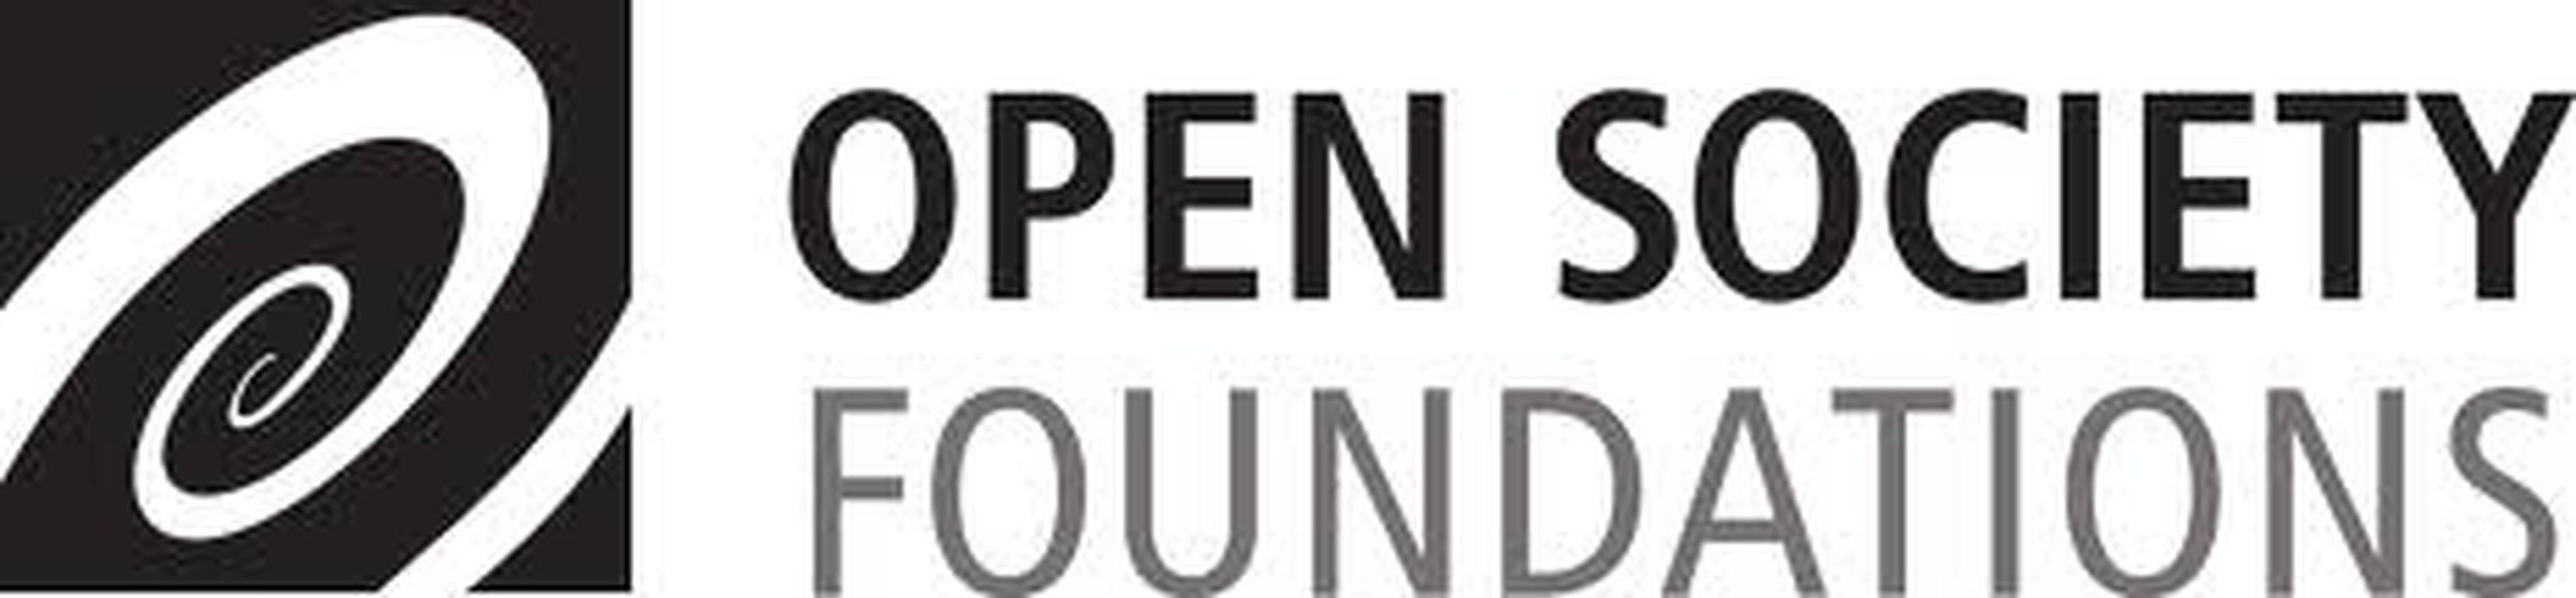 Supported [in part] by a grant from the Foundation Open Society Institute in cooperation with the Education Support Program of Open Society Foundations